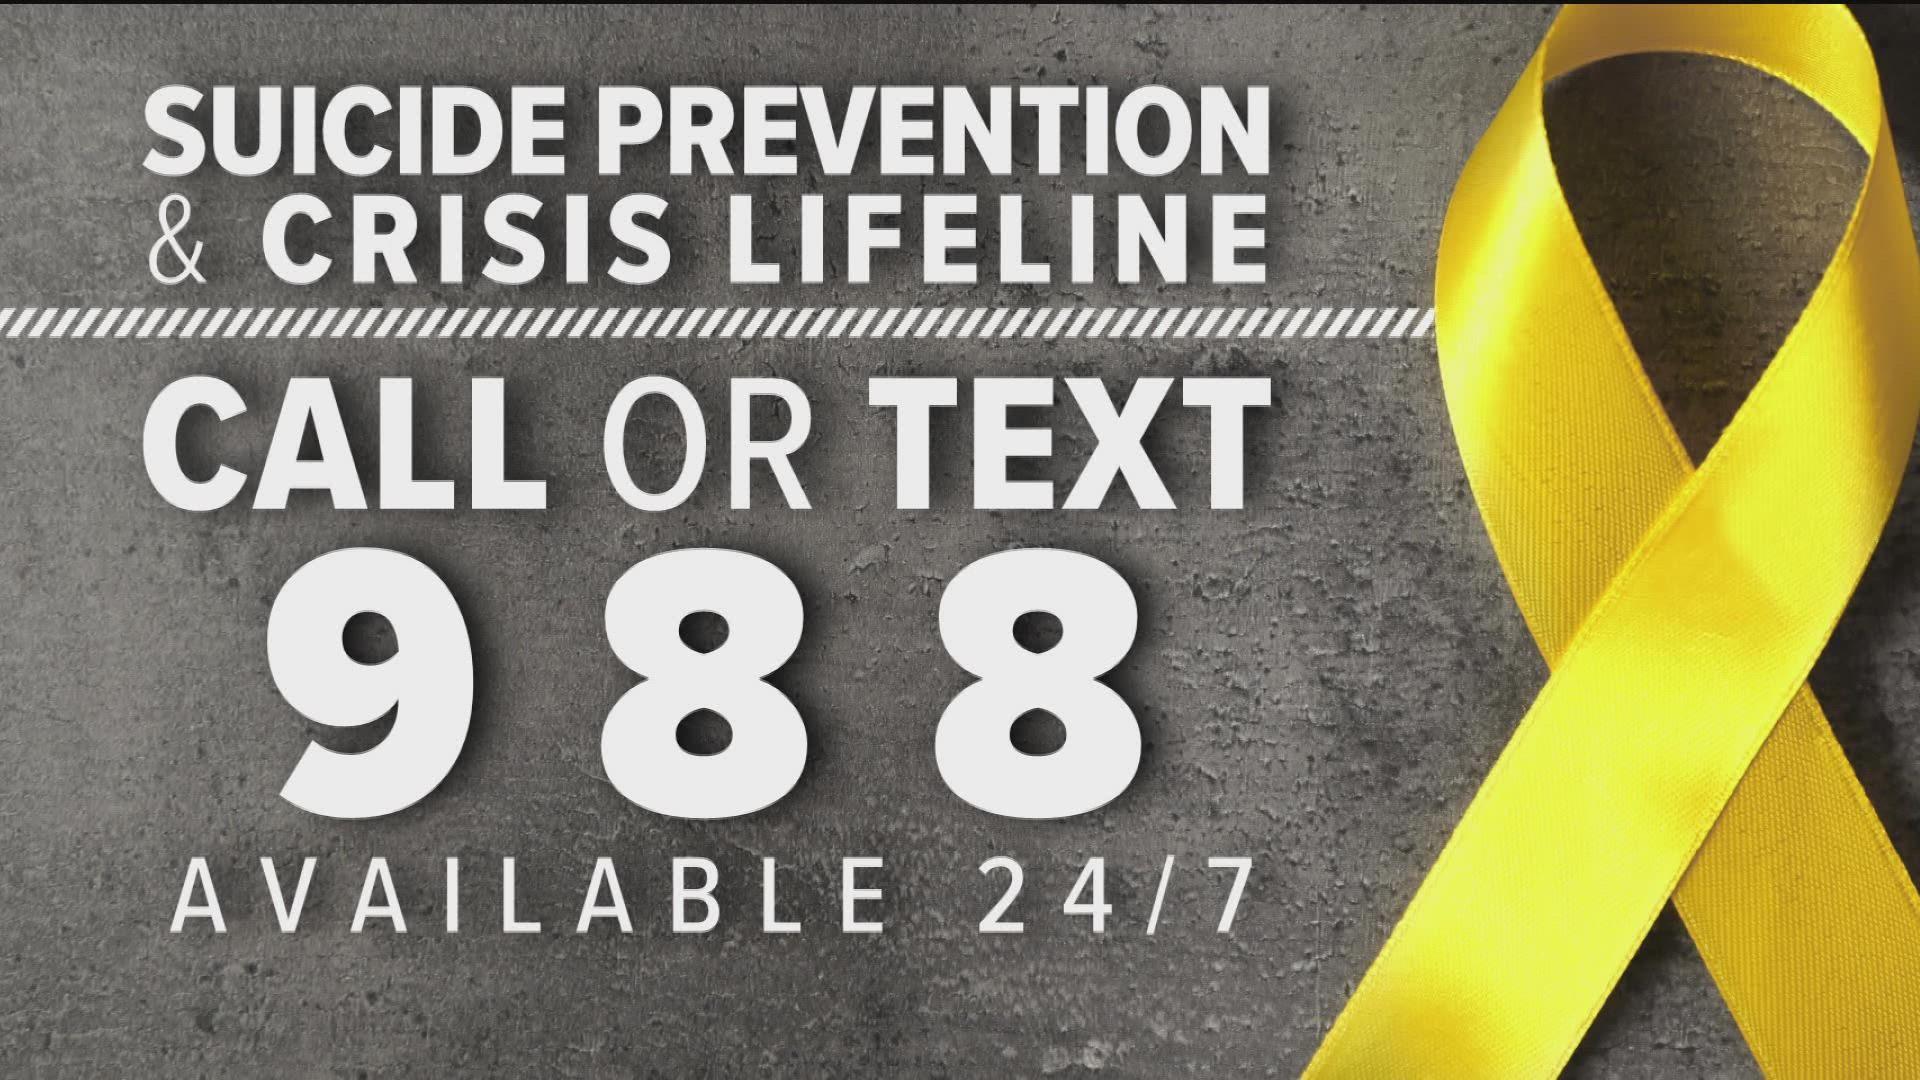 Suicide Prevention Lifeline call or text 988